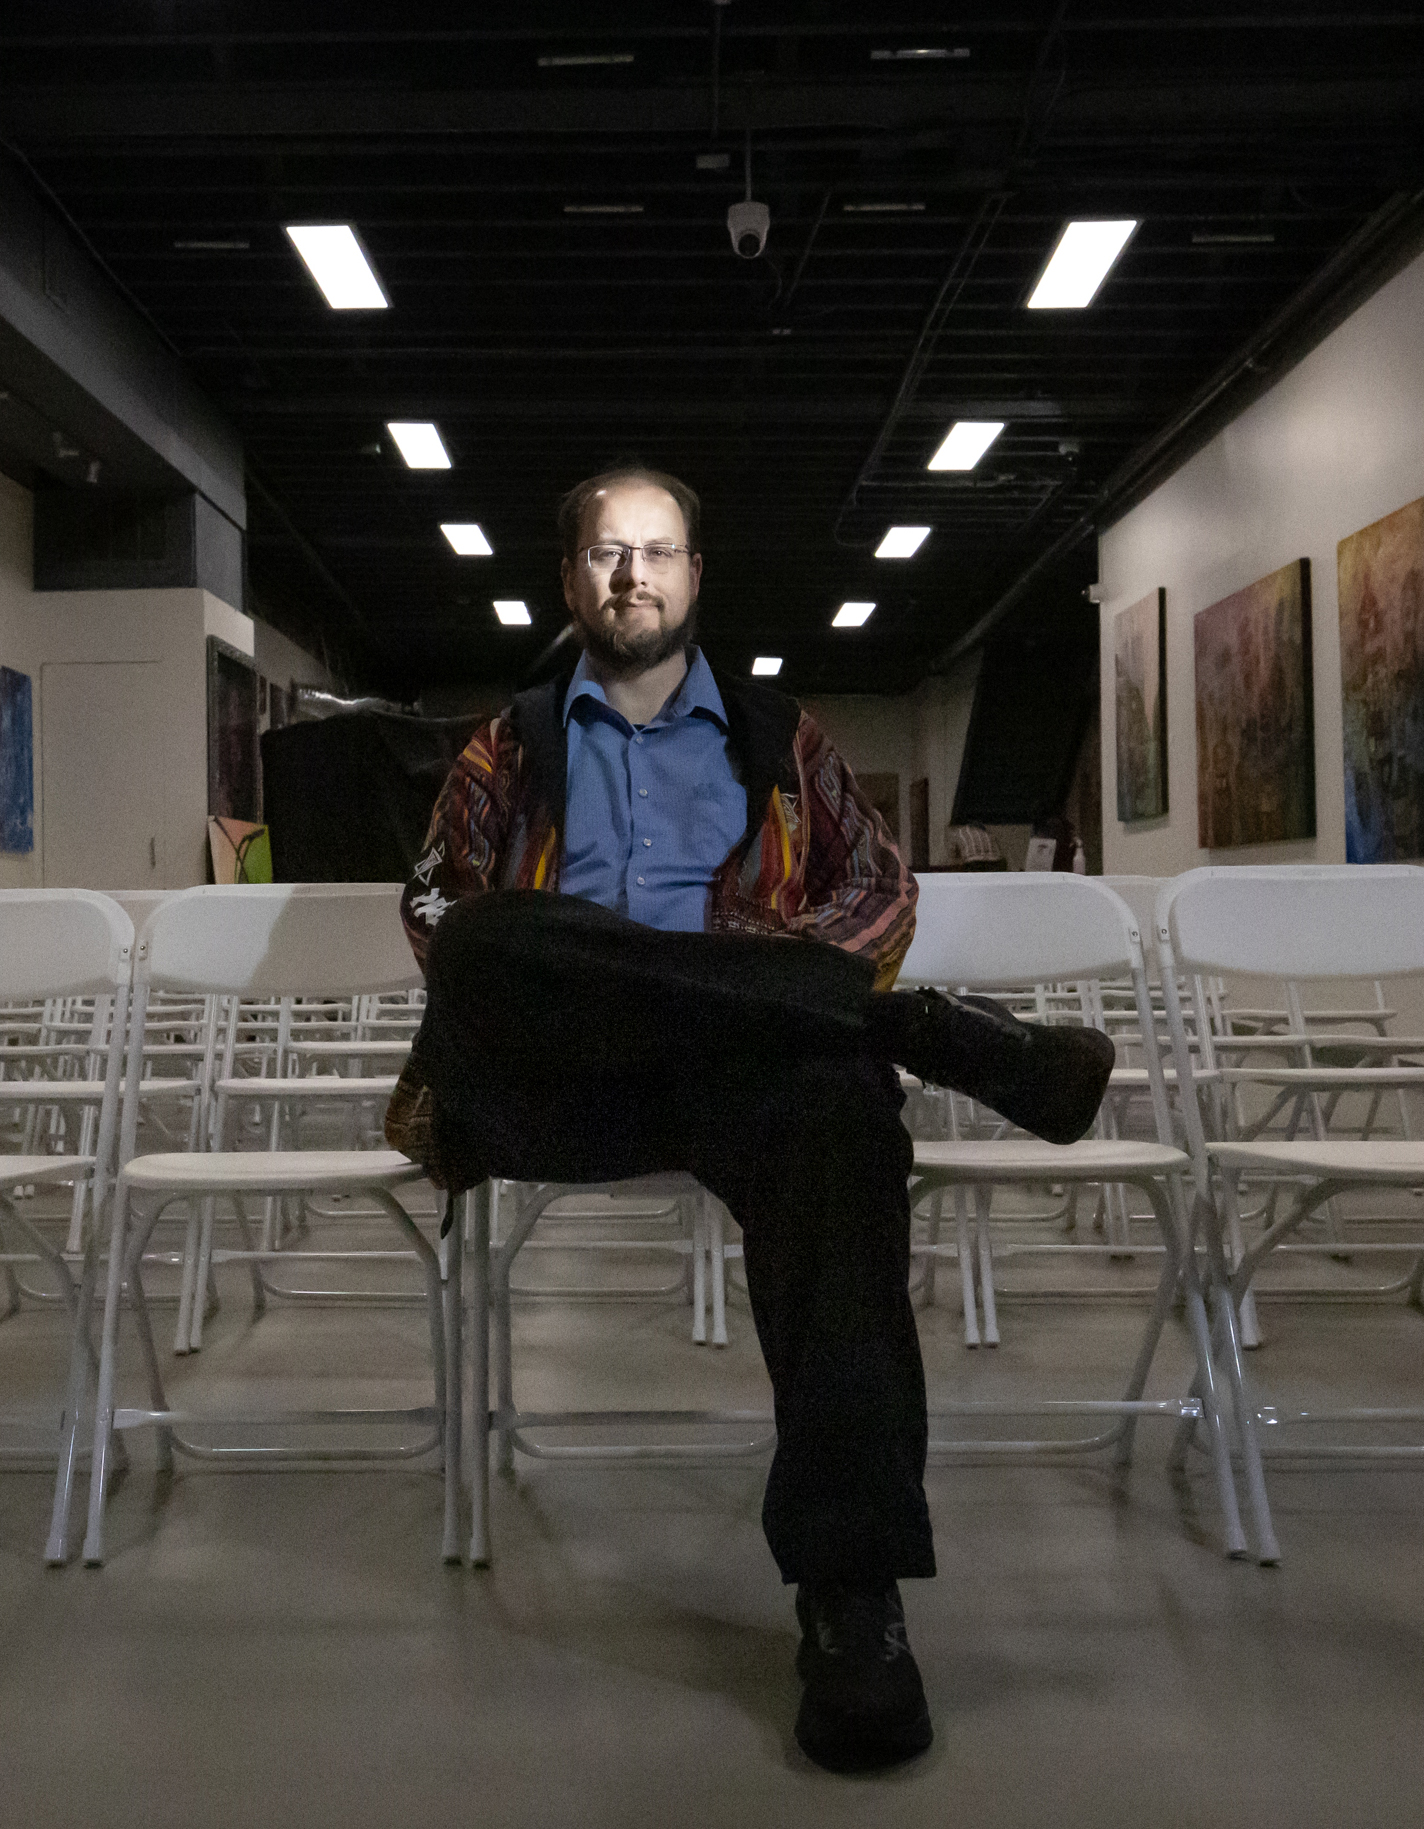 A man is sitting cross-legged on a chair in an art gallery with paintings on the walls and rows of white chairs.